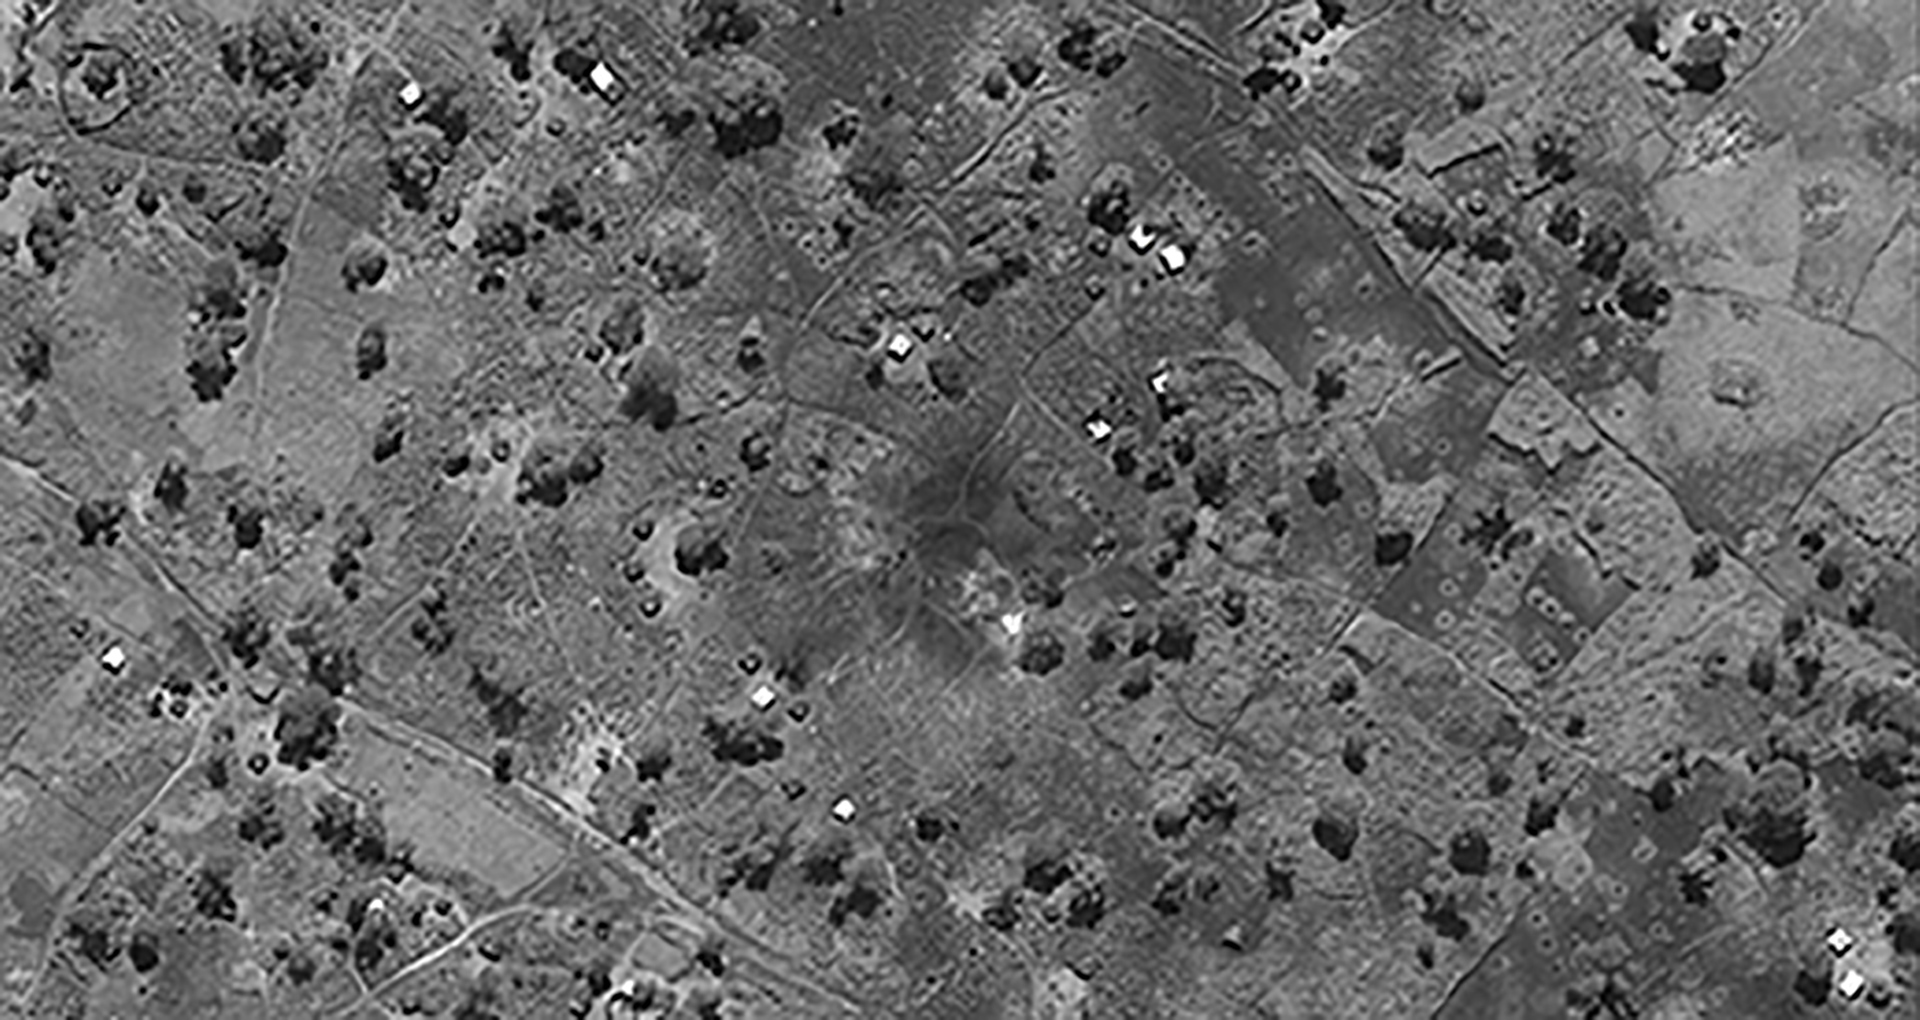 FIGURES 3-4. Evidence of airstrike outside of Jau, Unity State, South Sudan, appears in the center of the bottom image, taken Sept. 8, 2013. Before image was taken June 12, 2013. Both are courtesy of DigitalGlobe.